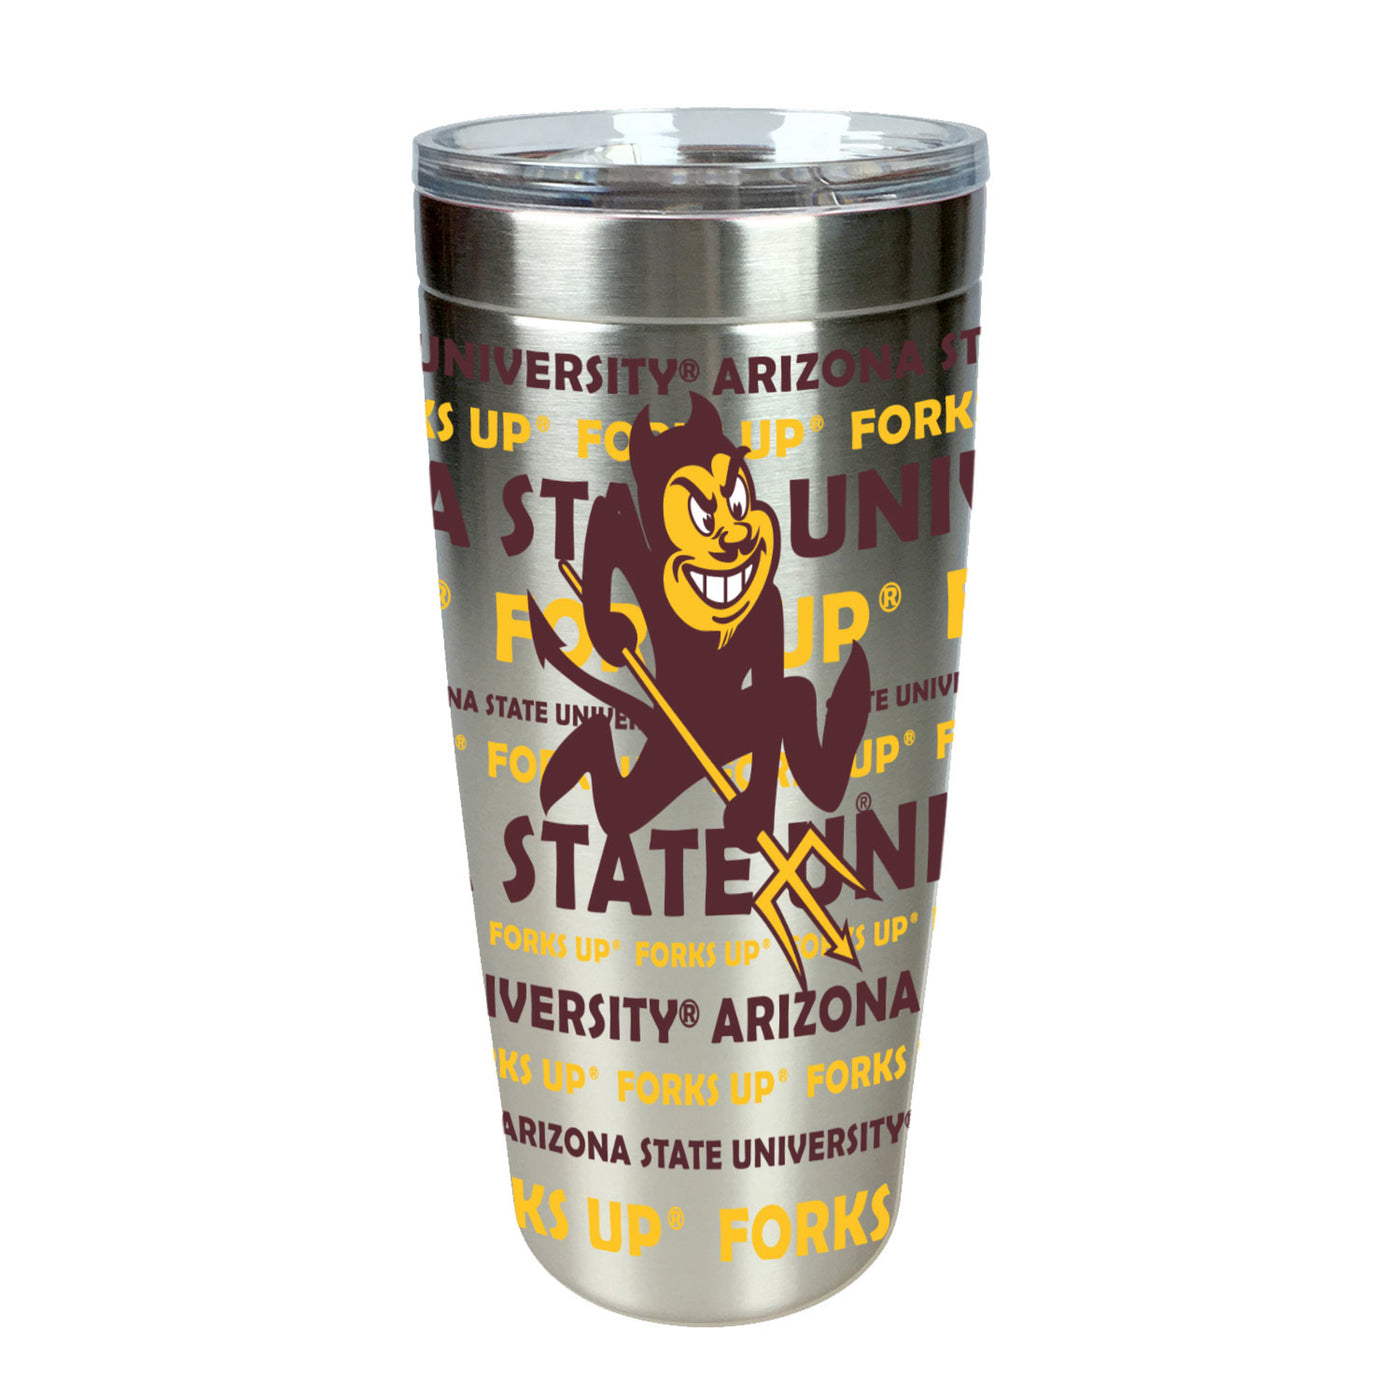 ASU 20 ounce Sliver tumbler with clear lid. Features University of Arizona State and Forks Ups text repeatedly. Includes Sparky logo front and center. 